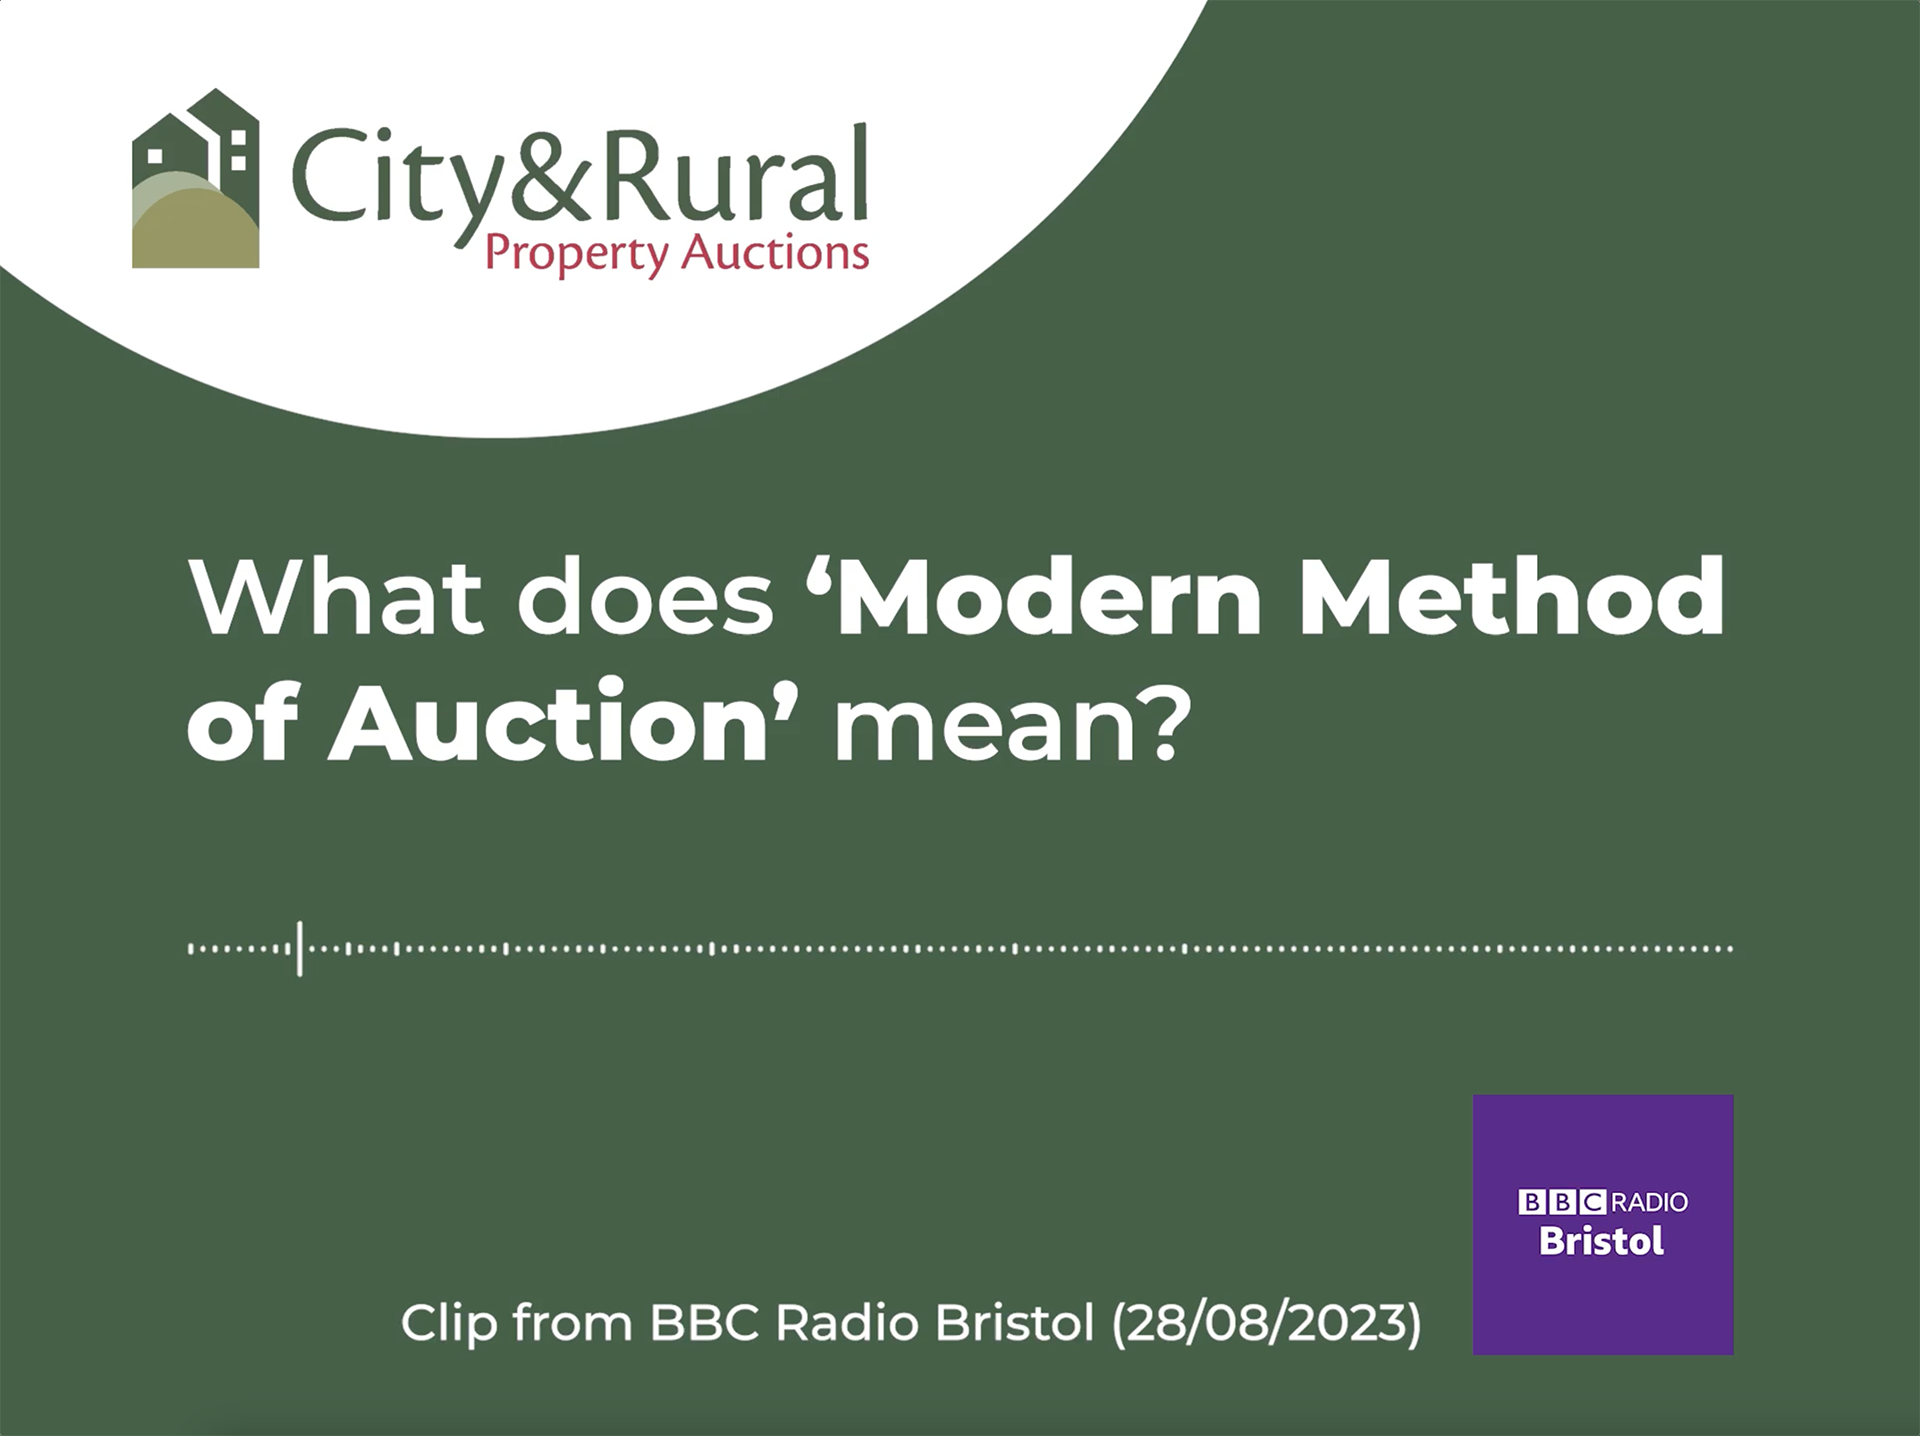 The Modern Method of Auction